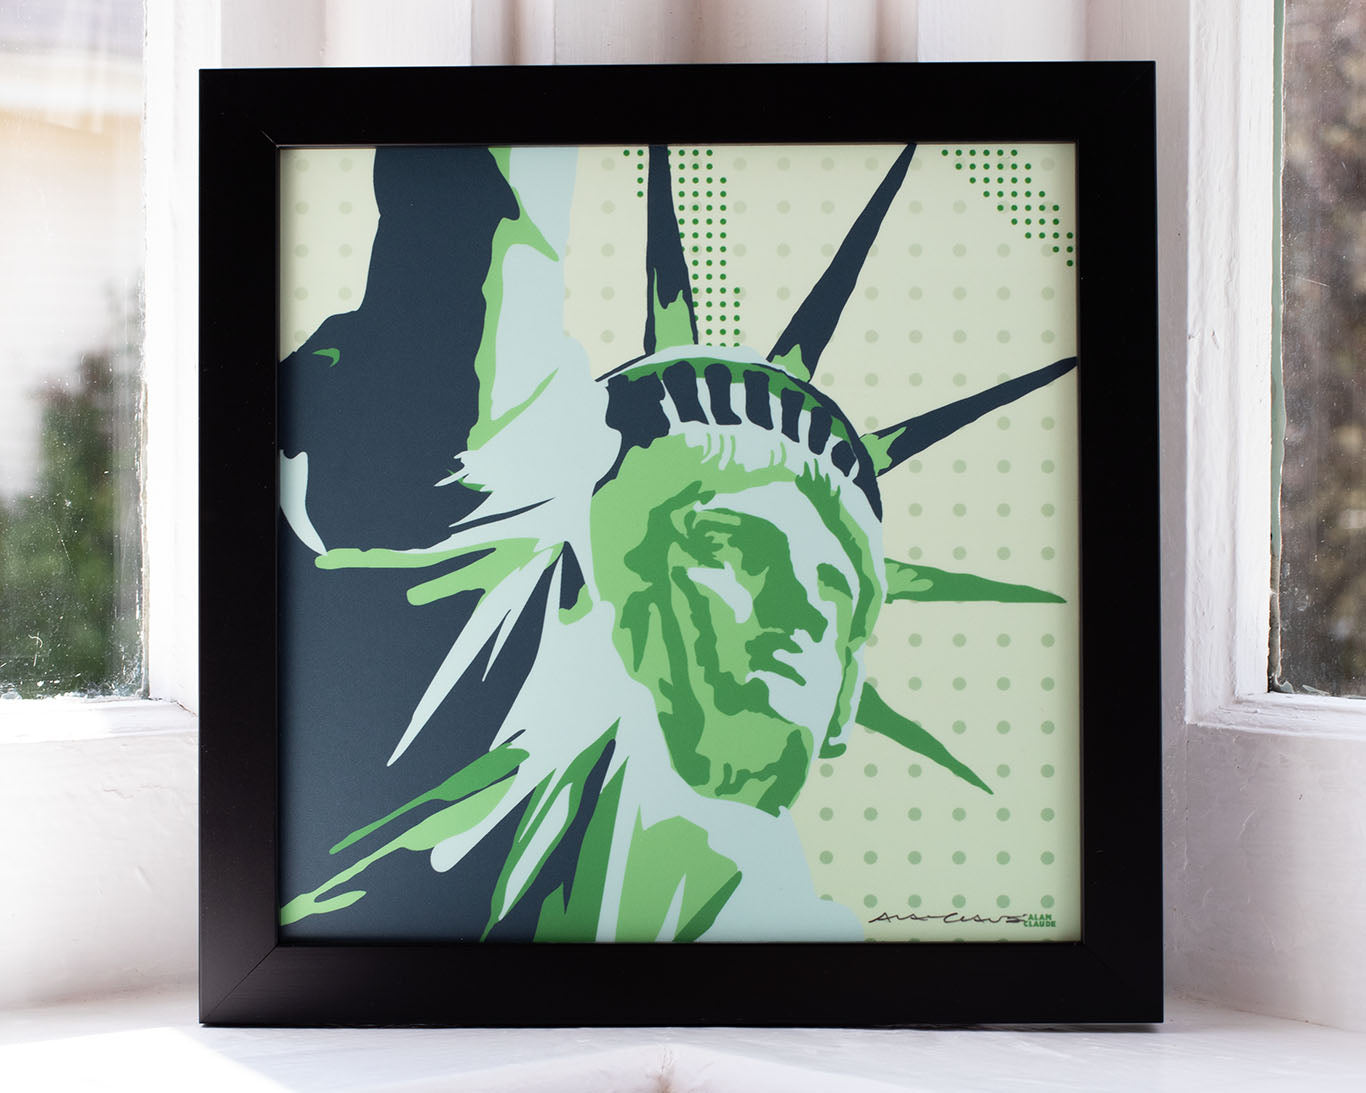 Statue Of Liberty Framed Art Print 8" x 8" Wall Poster Wall Poster By Alan Claude - New York